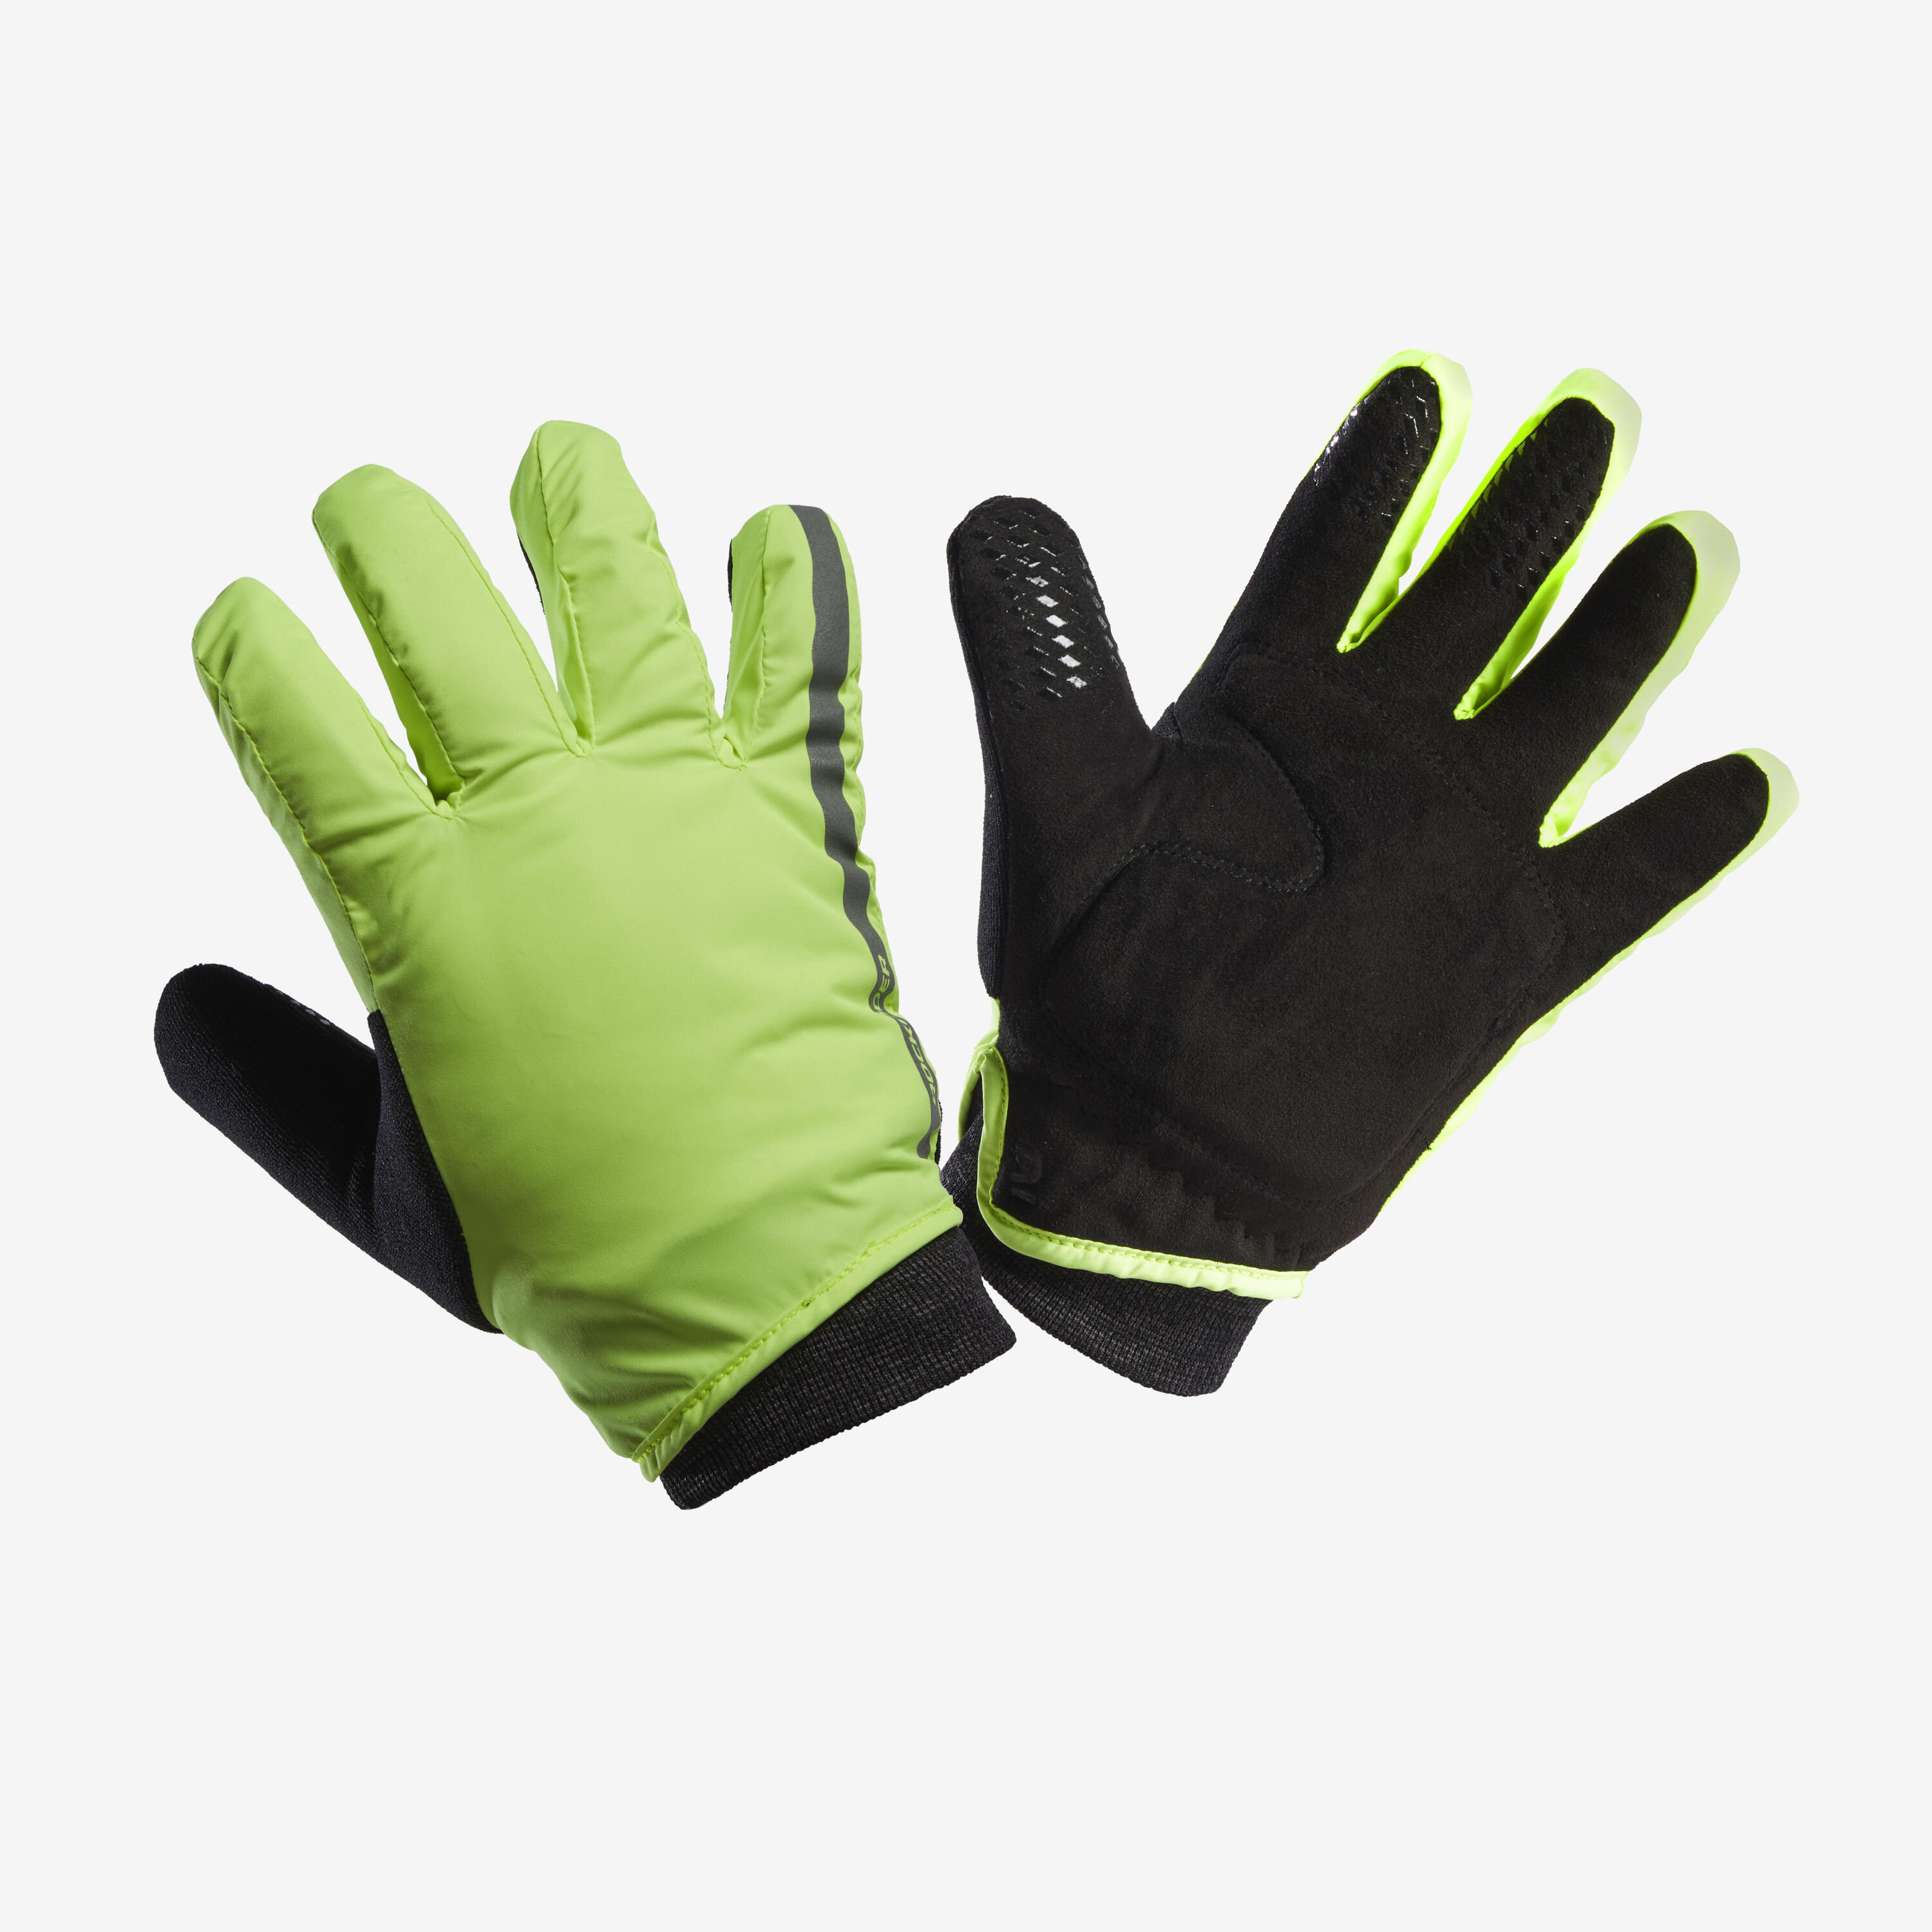 BTWIN Kids' Winter Cycling Gloves 500 - Neon Yellow